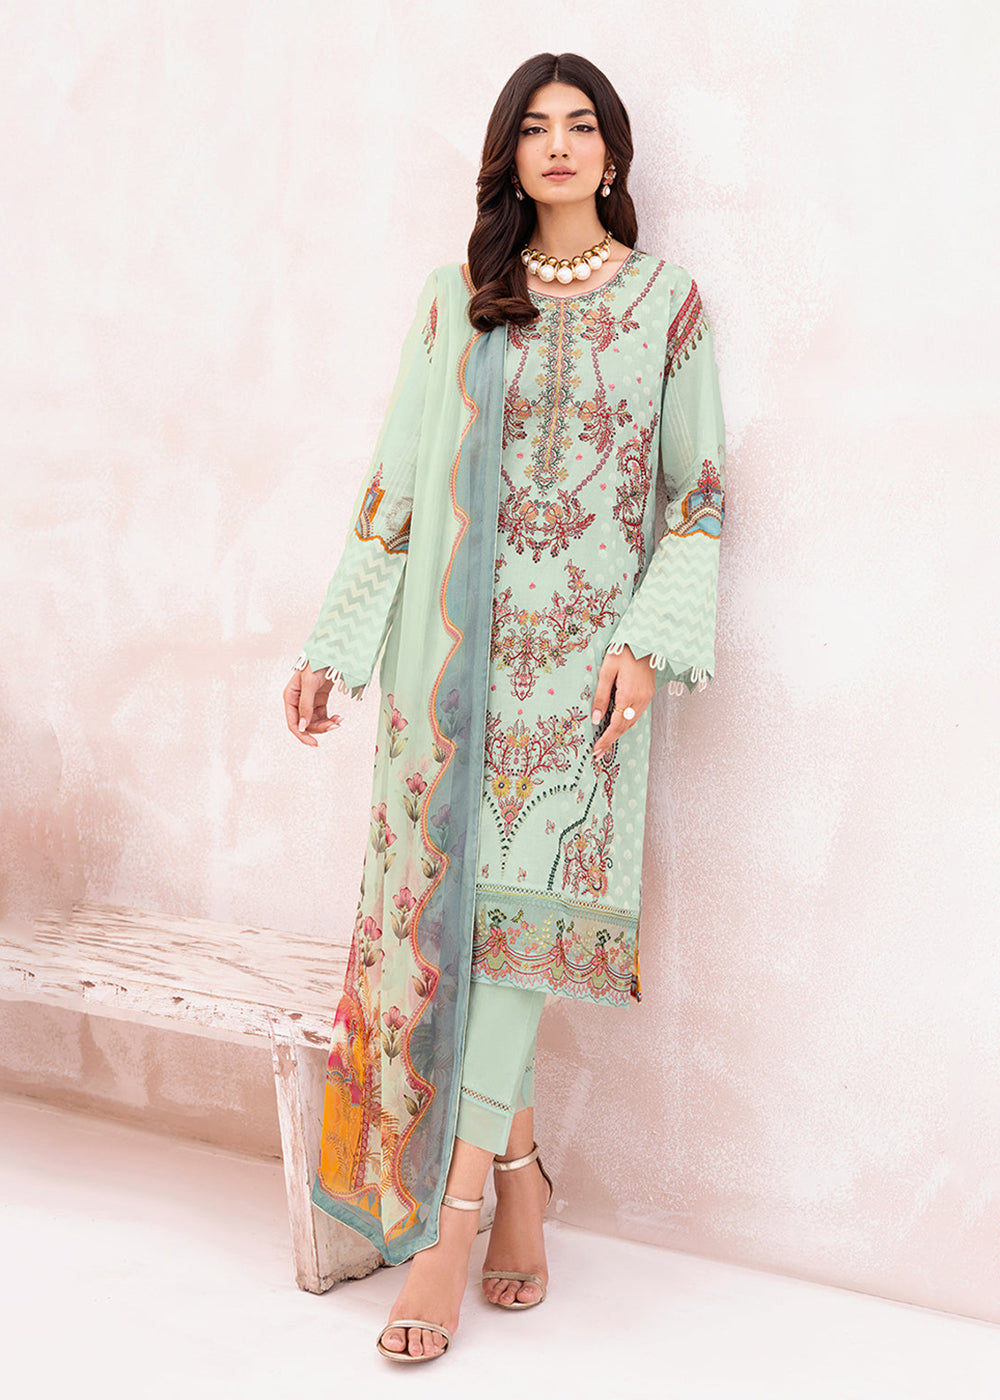 Buy Now Green Pakistani Salwar Suit - Ramsha Mashaal Collection Vol 7 - #L-708 Online in USA, UK, Canada & Worldwide at Empress Clothing.